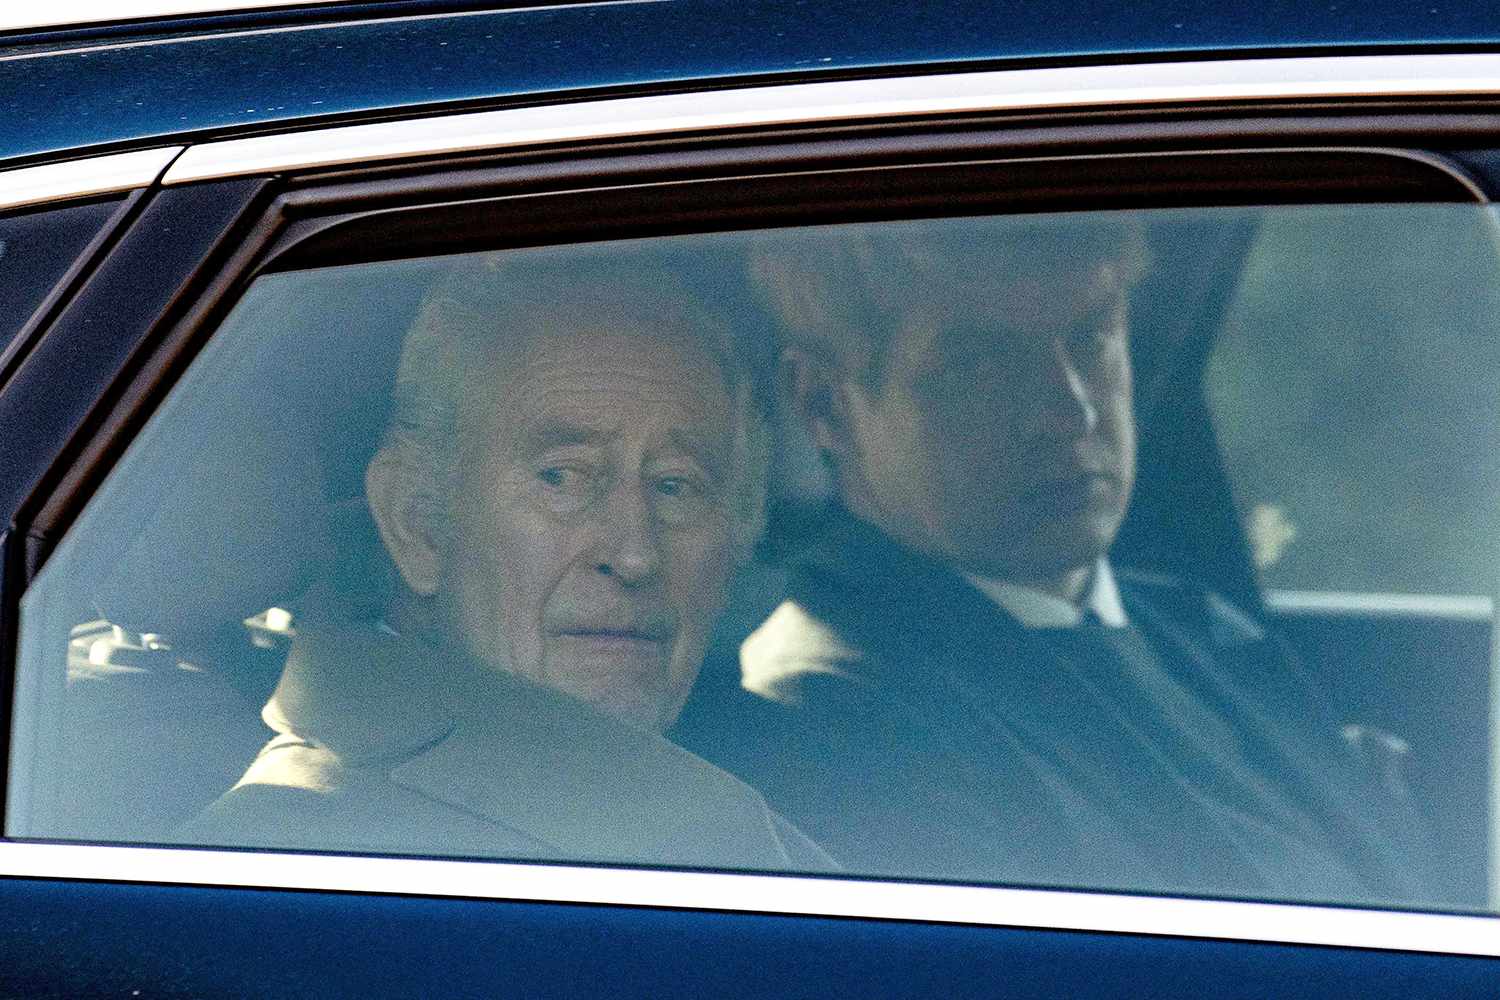 EXCLUSIVE: HM King Charles III is seen leaving RAF Marham on his way to the Sandringham Estate where he will rest prior to his prostate surgery next week. 